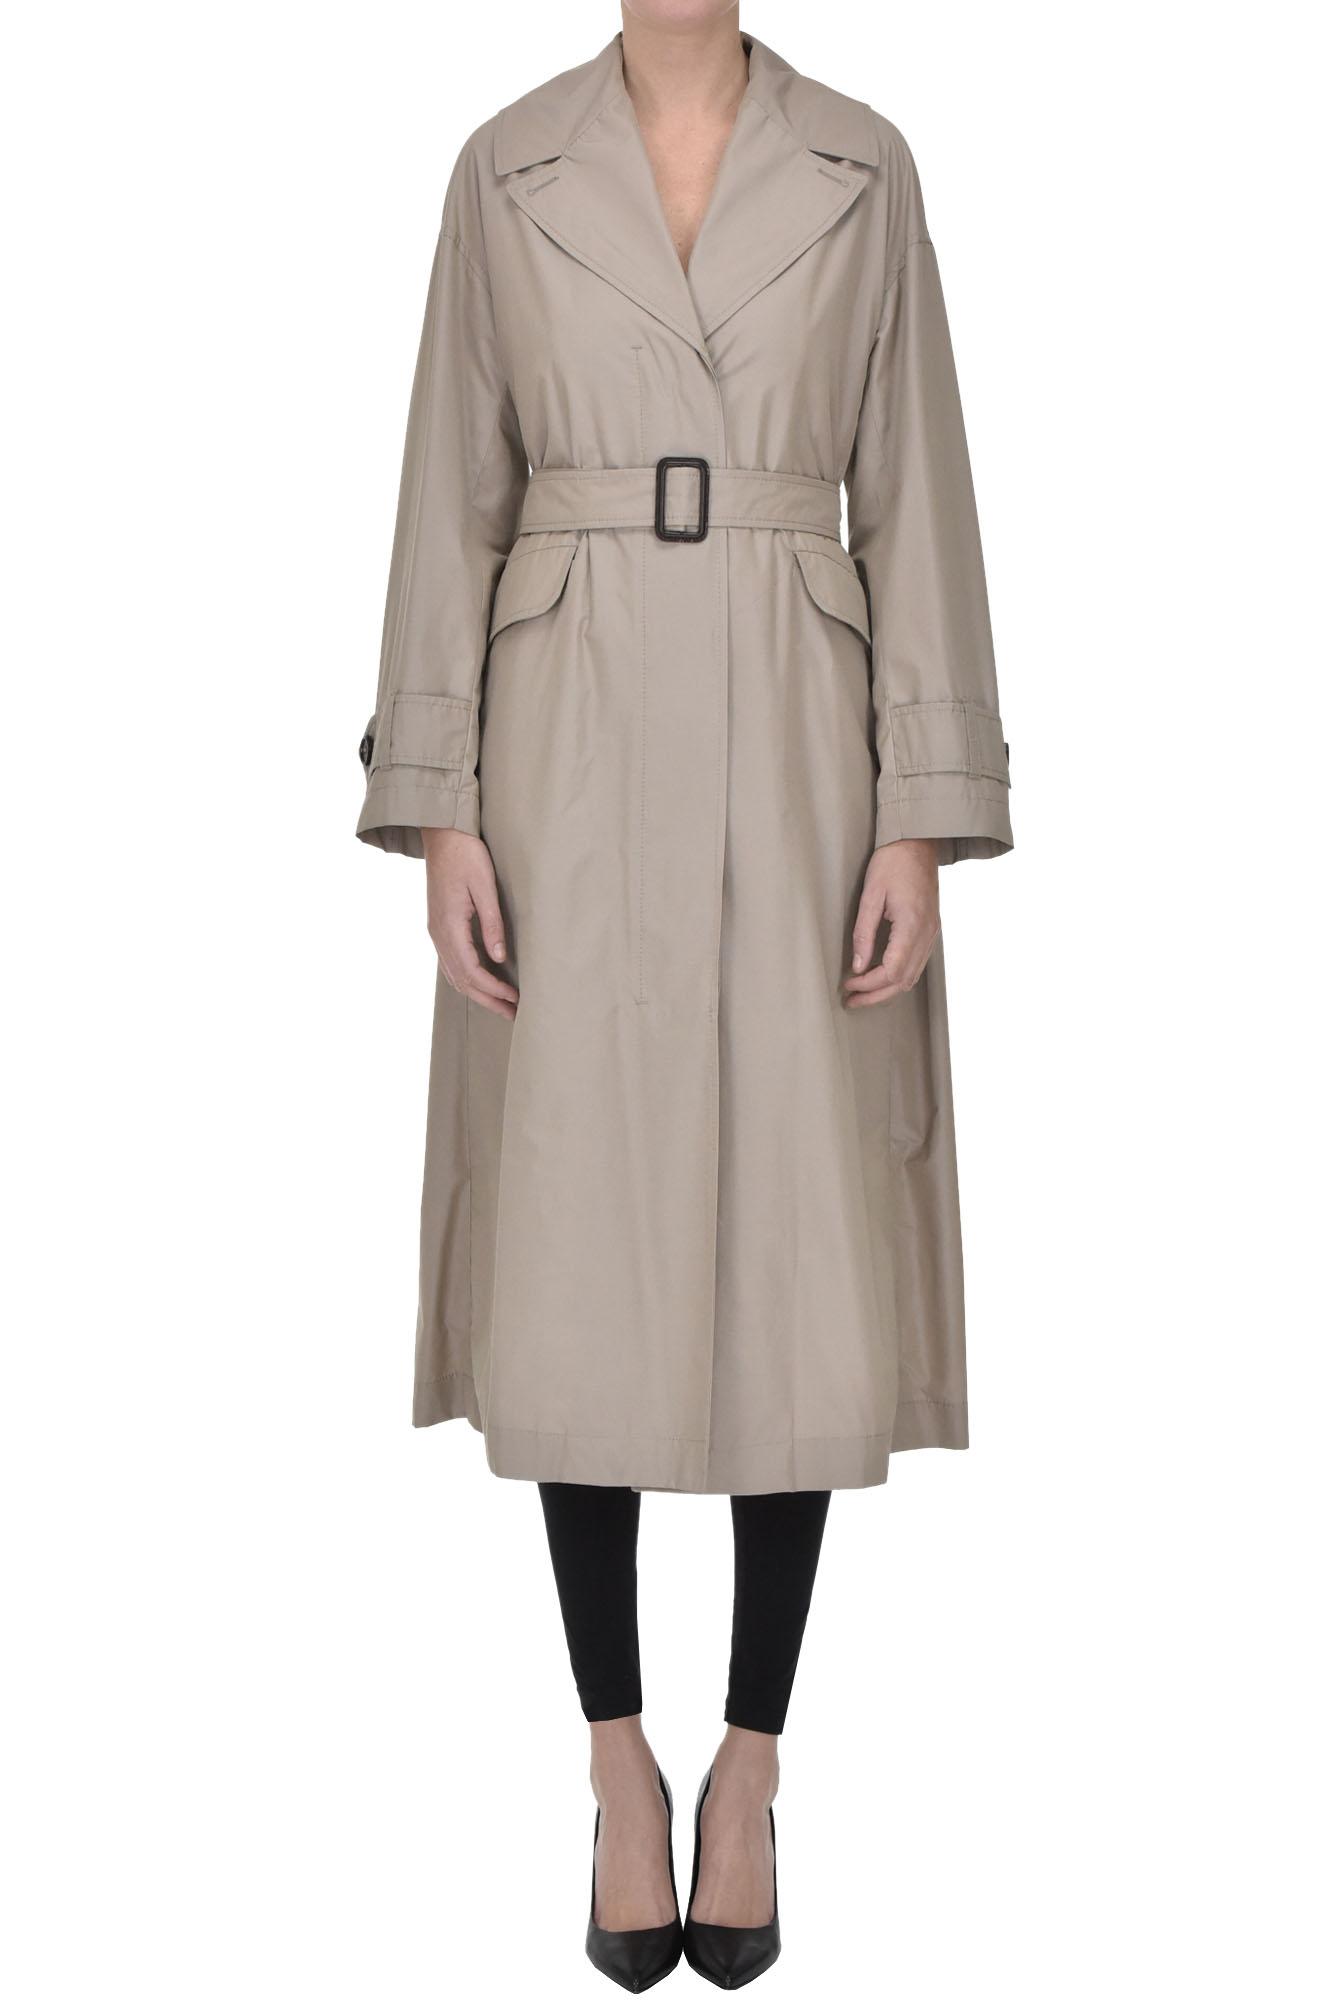 Max Mara Eimper Waterproof Trench in Natural | Lyst